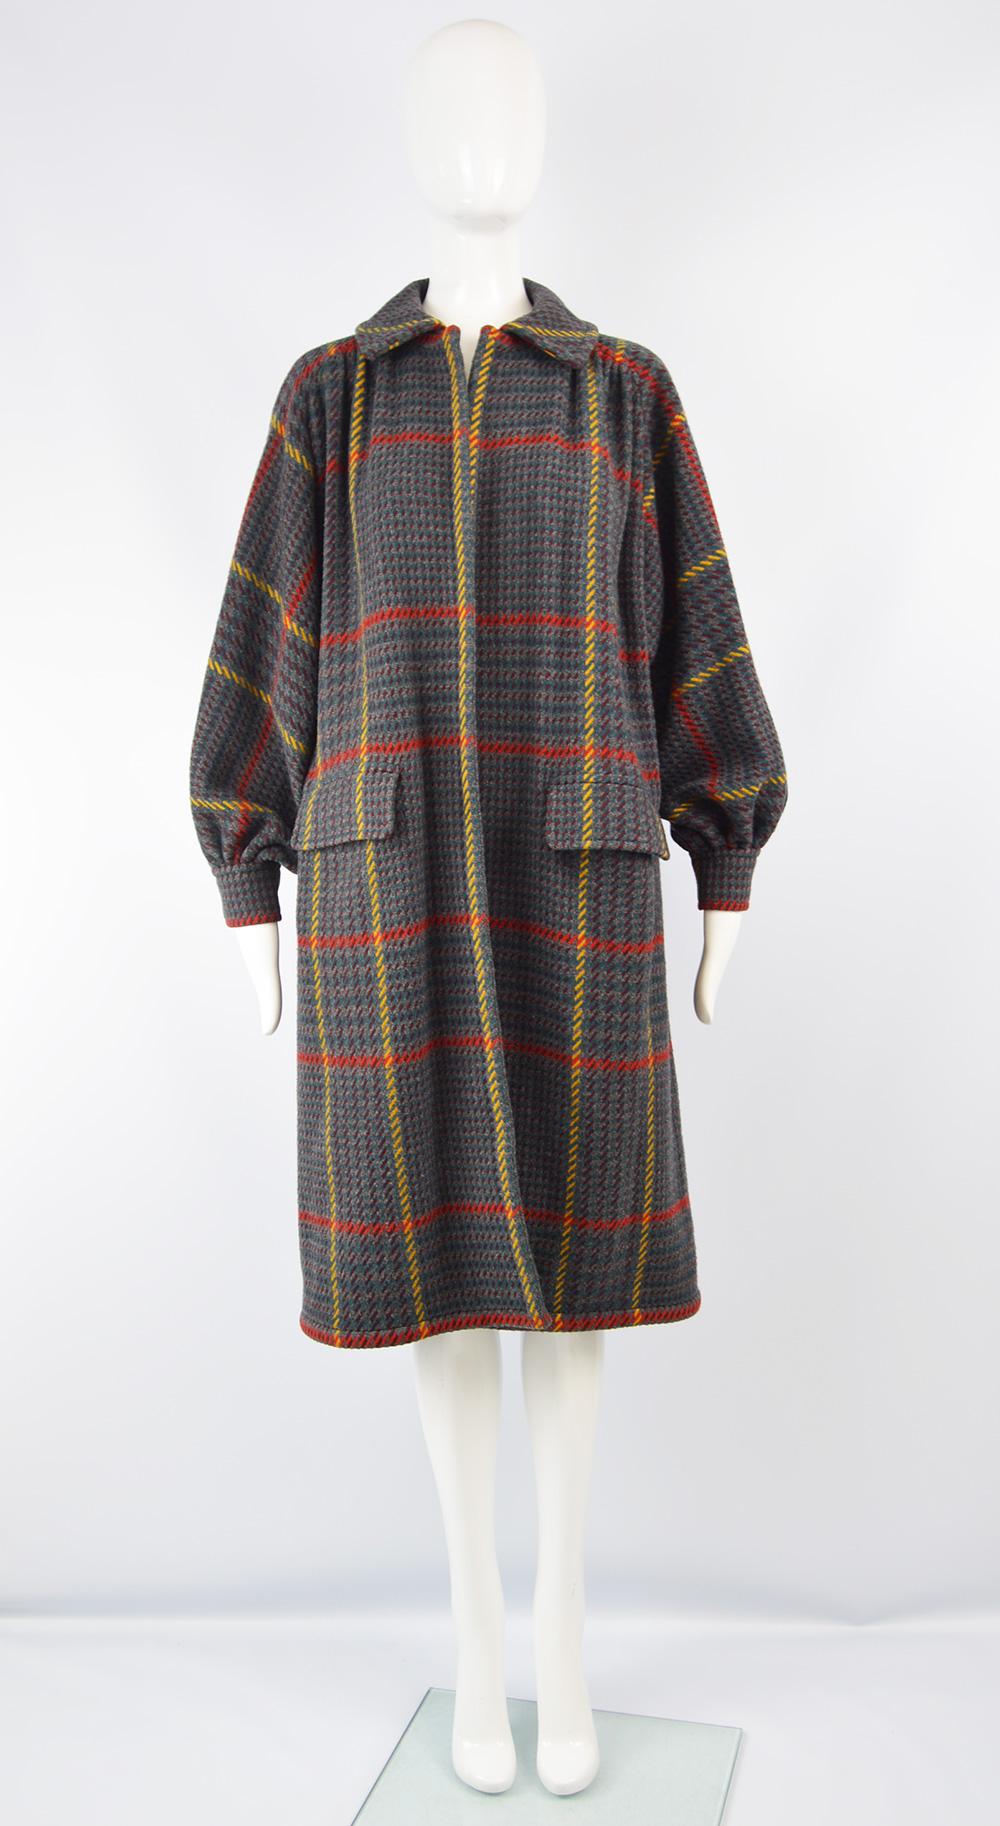 A stunning vintage women's collared coat from the 80s by luxury Italian fashion designer, Valentino. In a grey lightweight wool with a red and yellow checked pattern throughout. With an edge to edge design that has no fastenings and is meant to